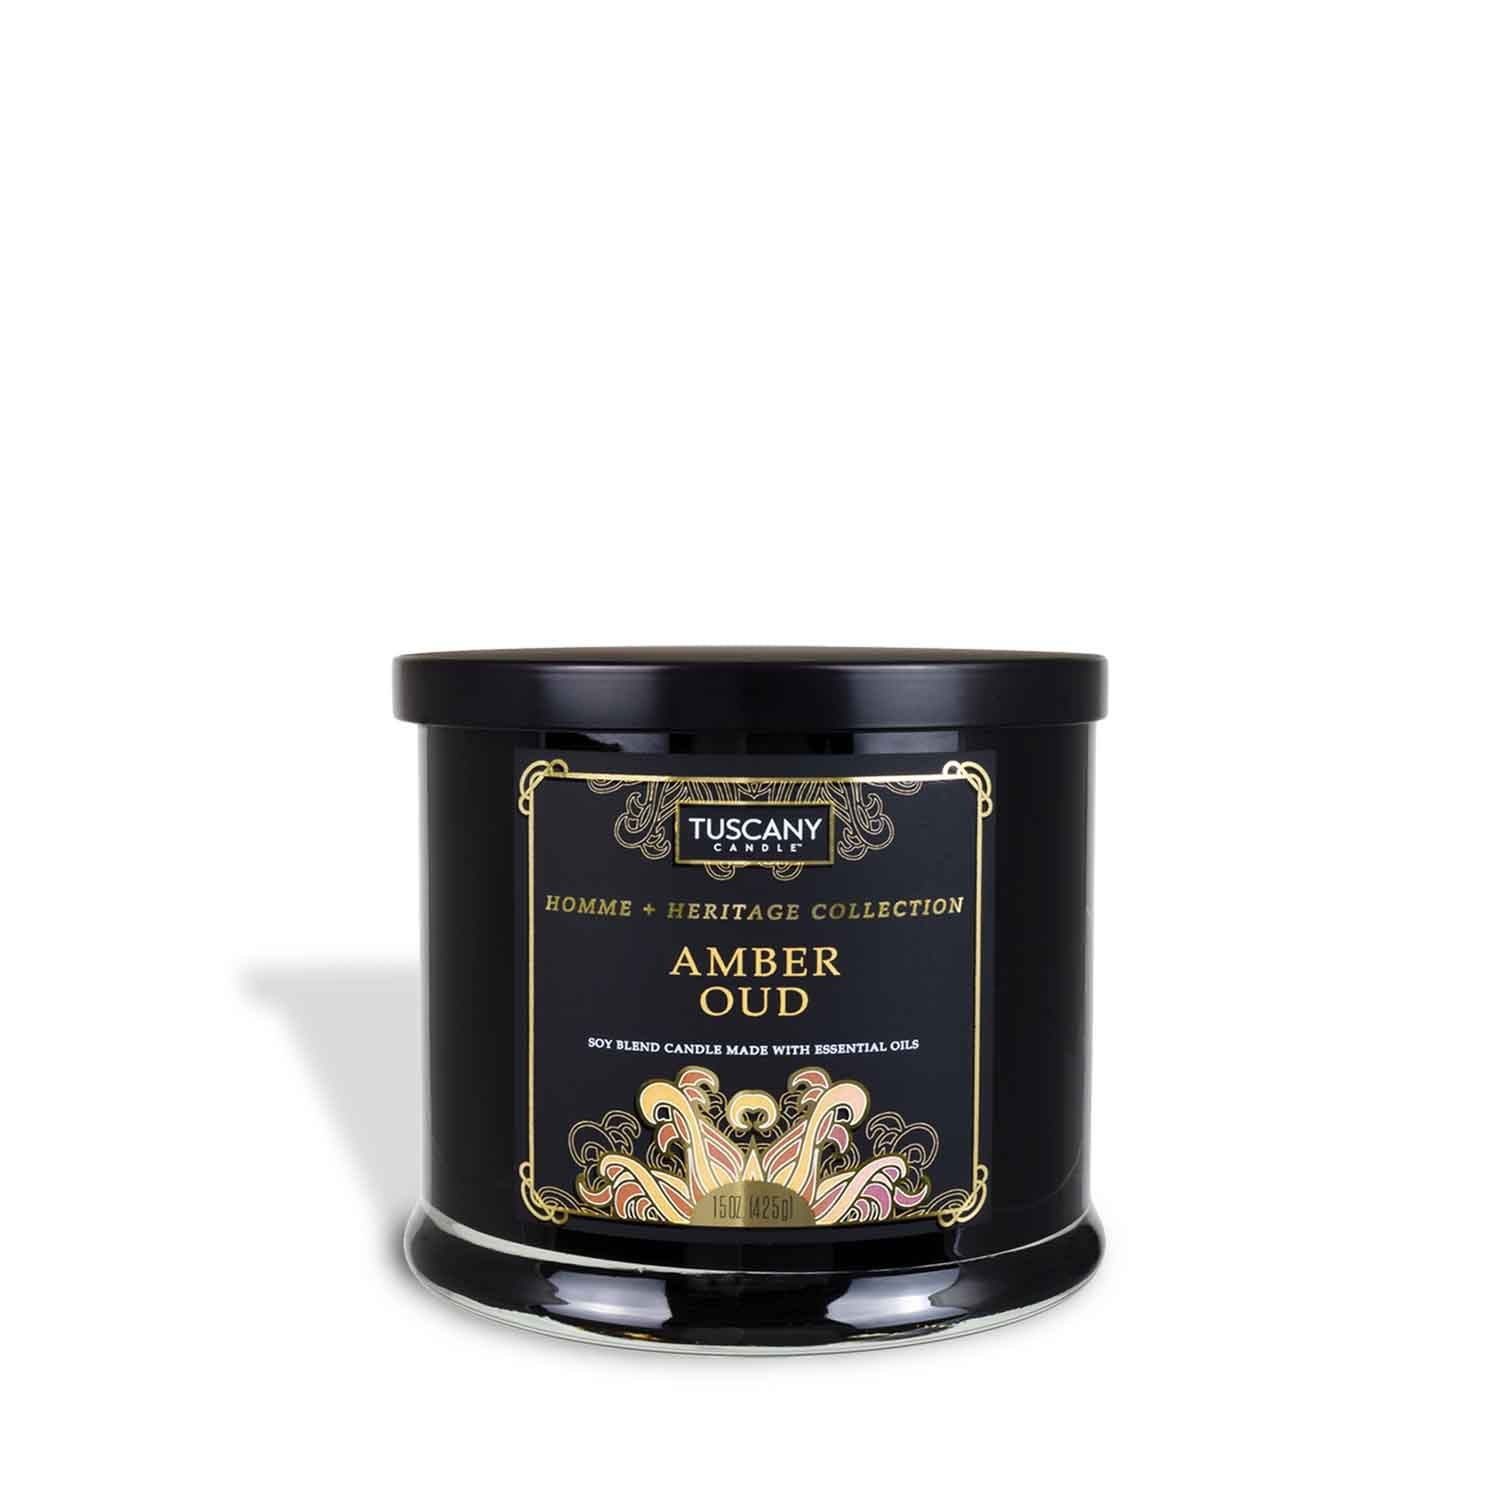 A tin of Amber Oud Scented Jar Candle (15 oz) from Tuscany Candle, infused with patchouli on a white background.